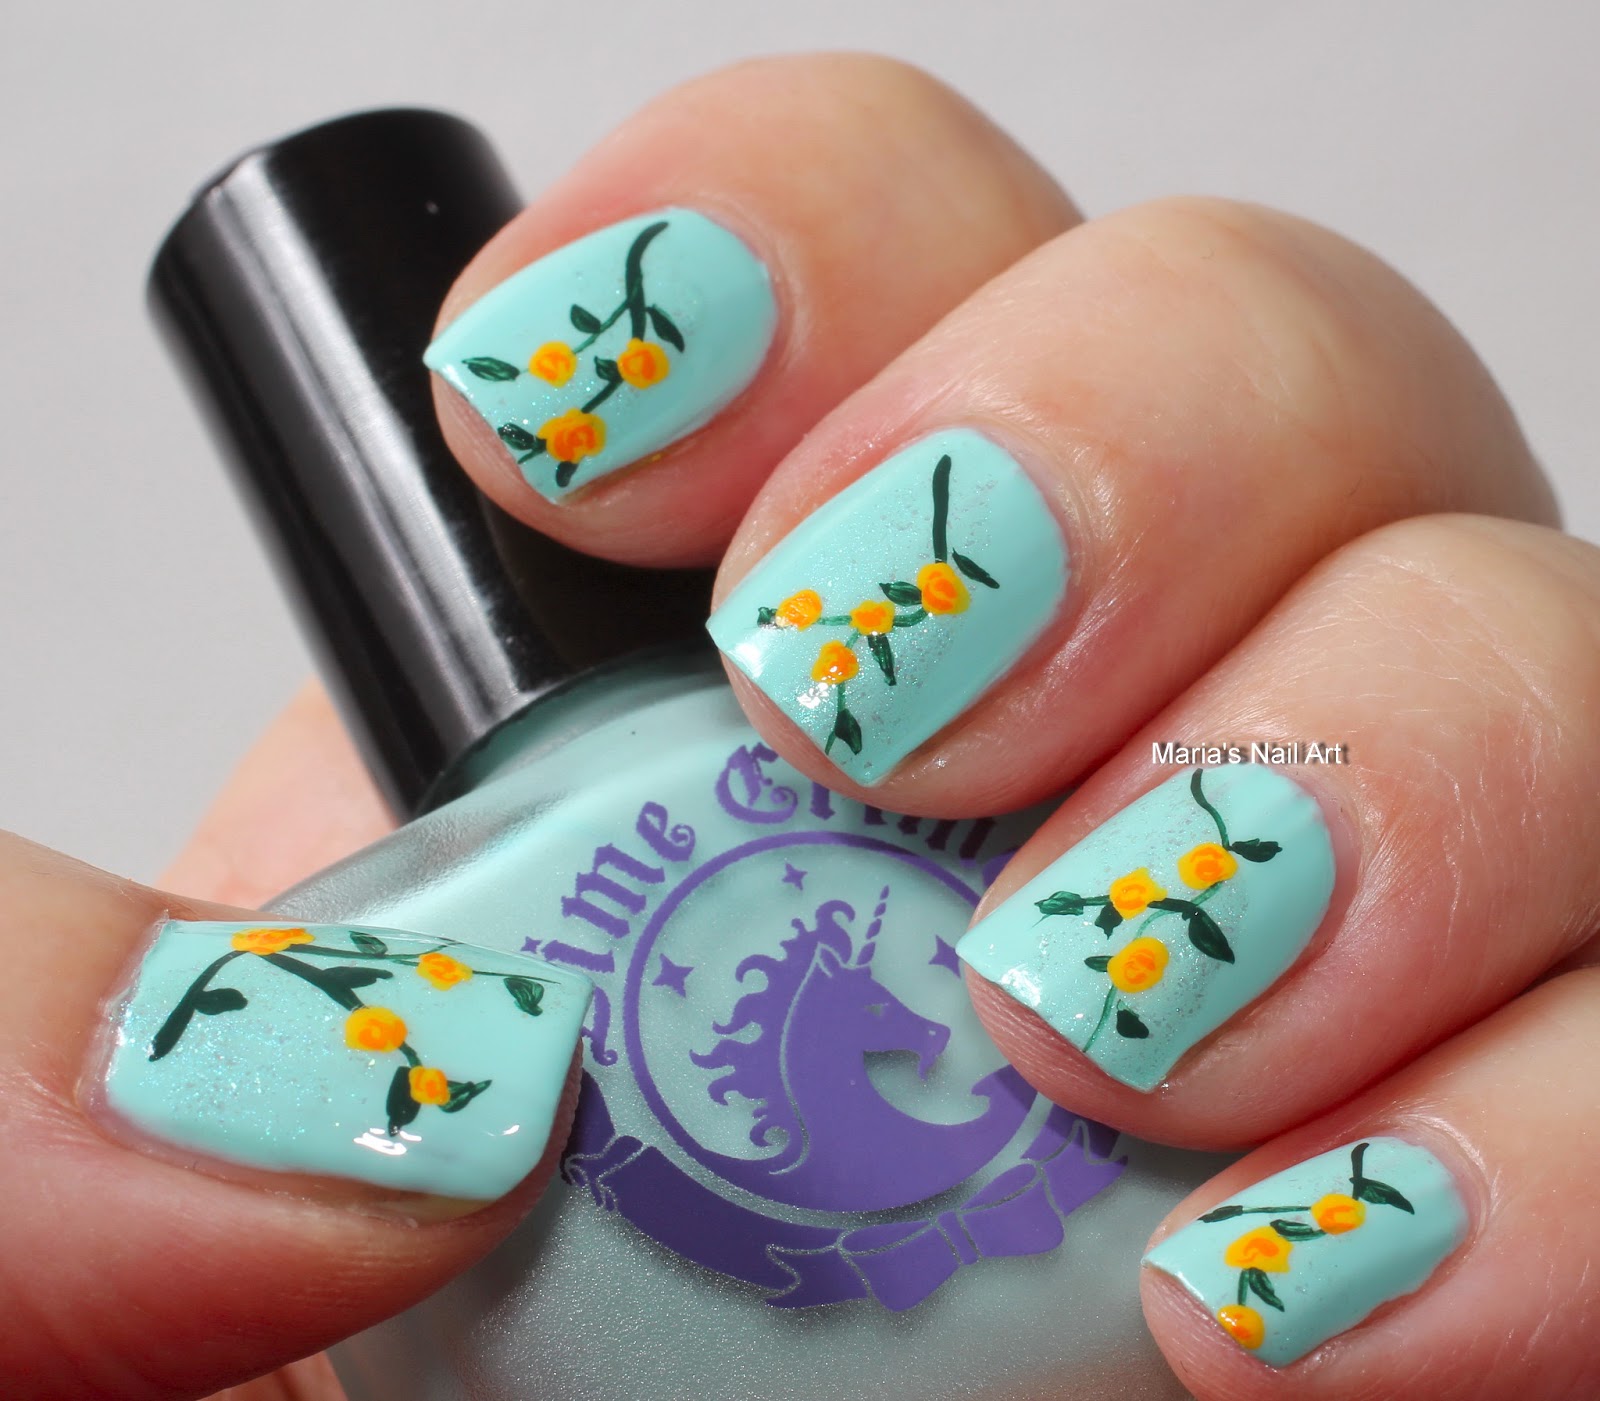 Marias Nail Art and Polish Blog: Tiny yellow roses in a blue mousse